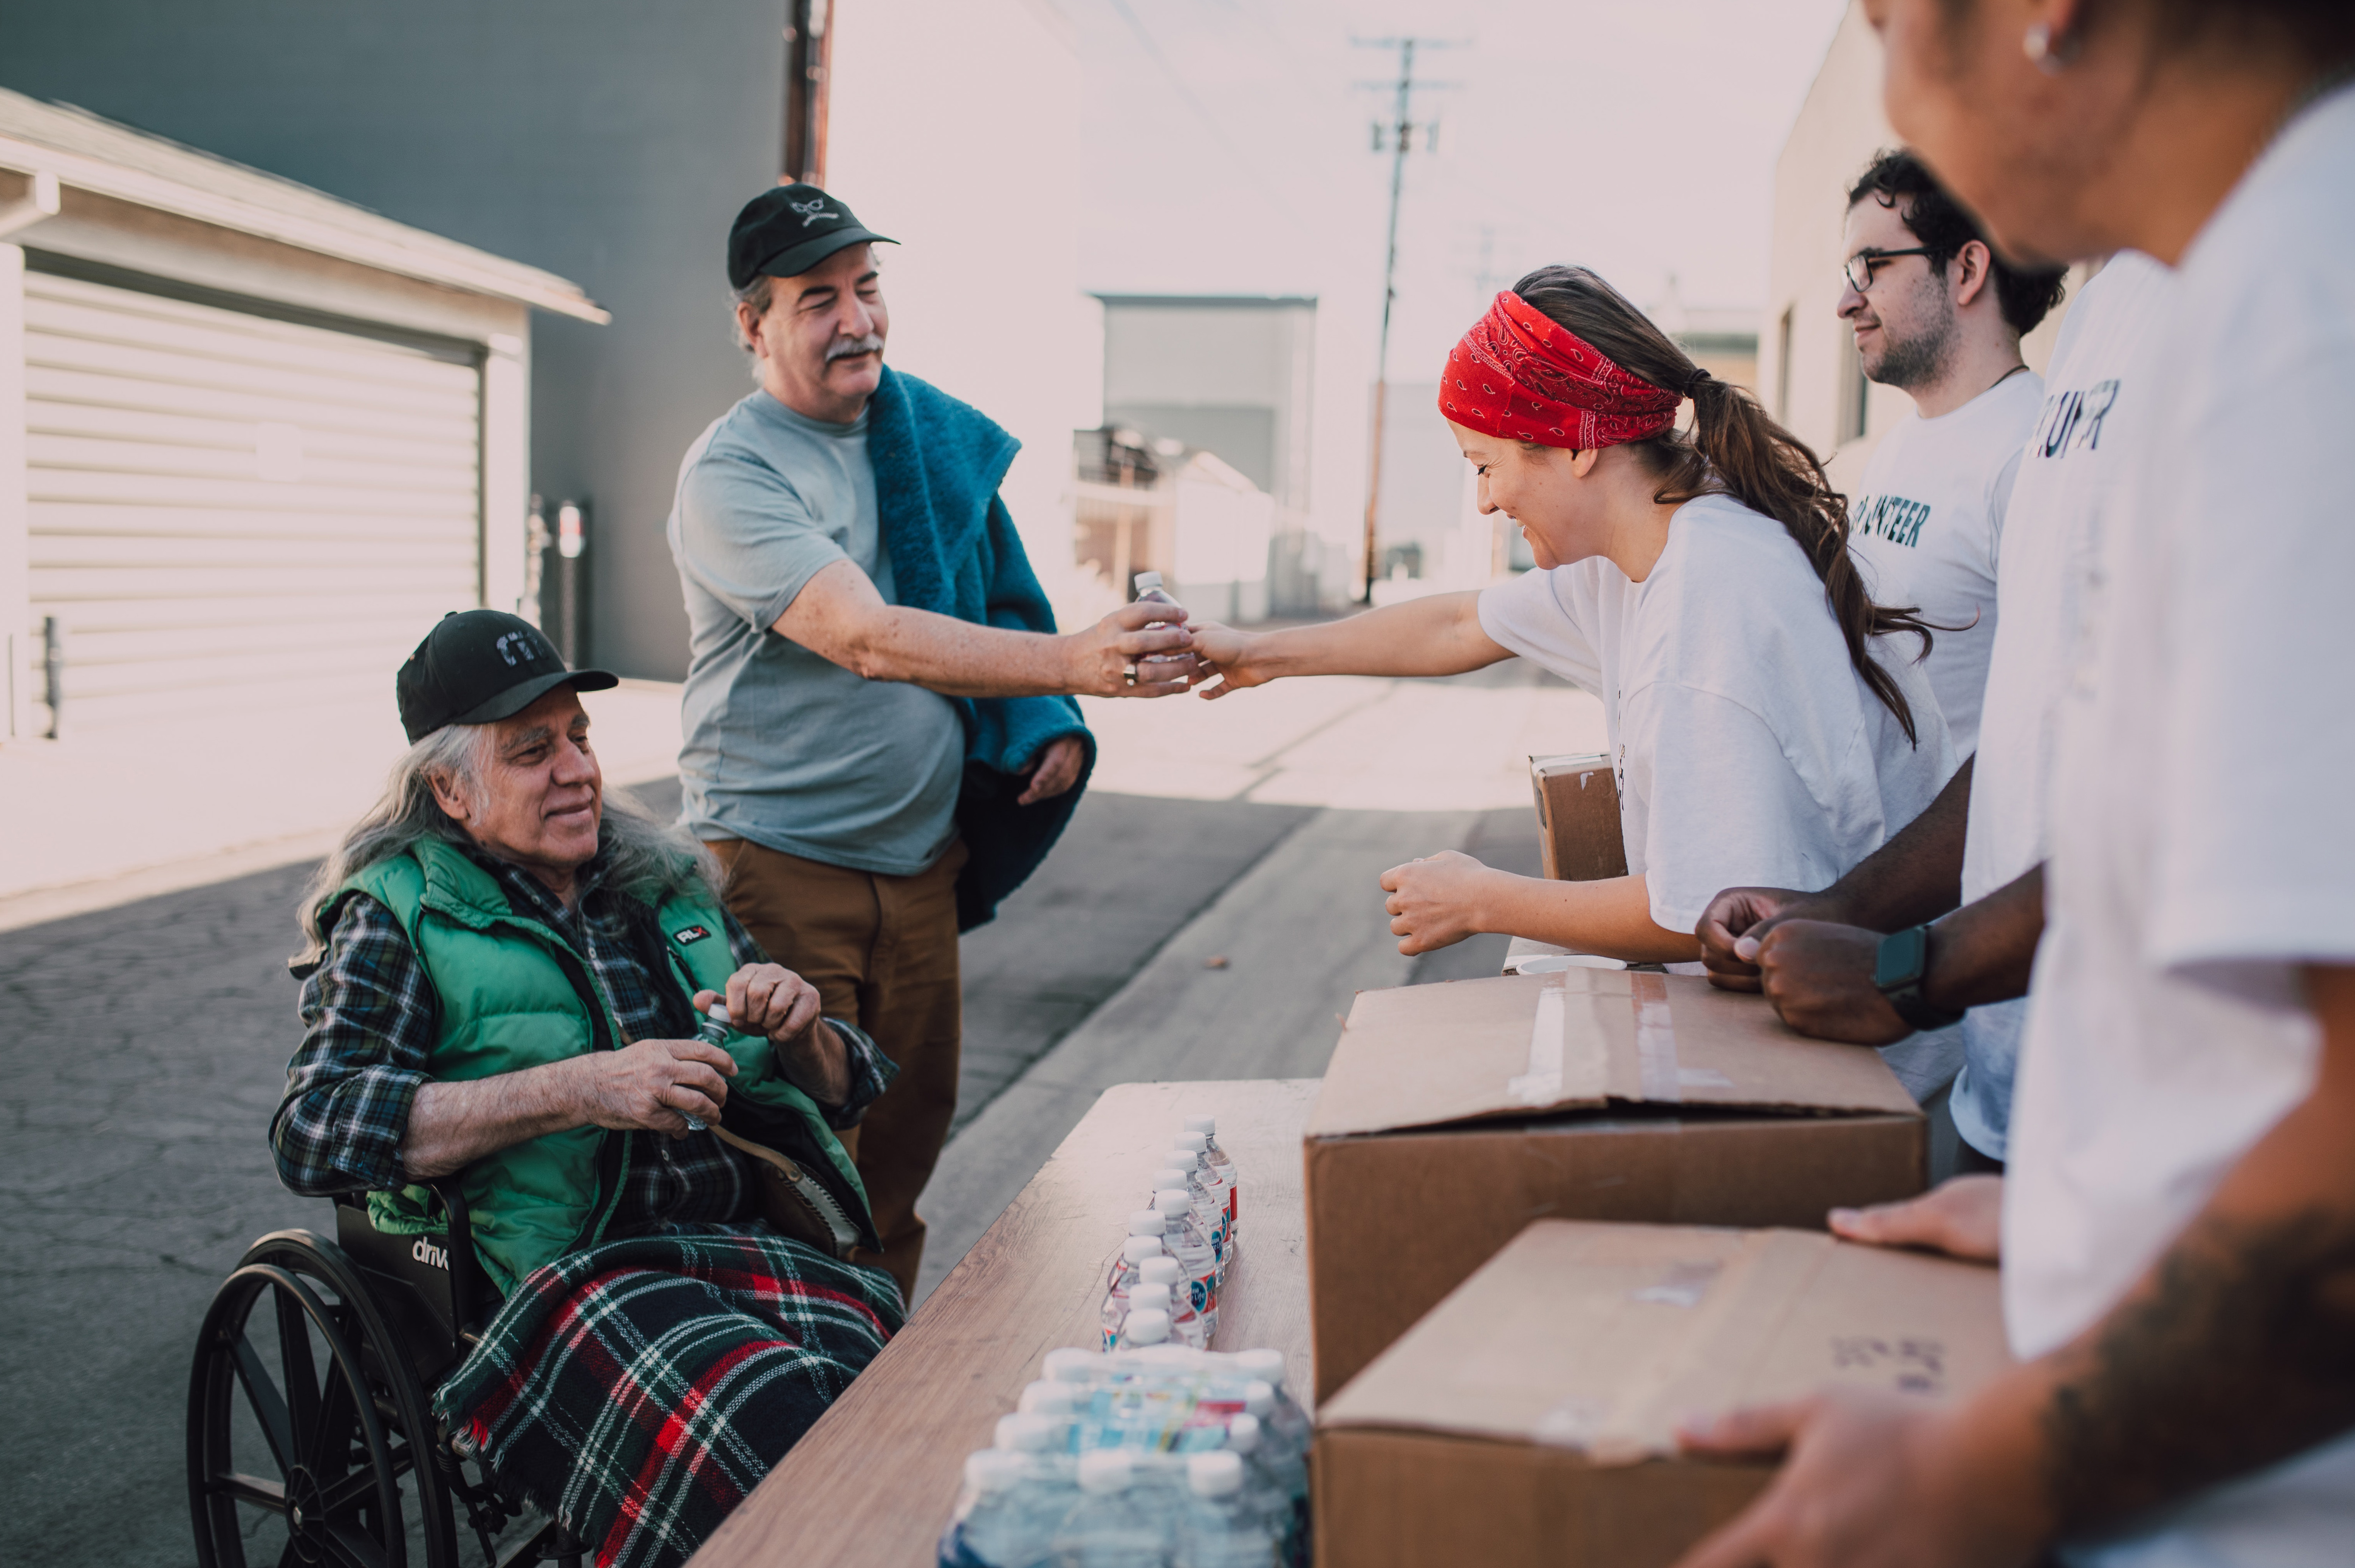 Volunteers working at a food pantry packaging and handing out food to people